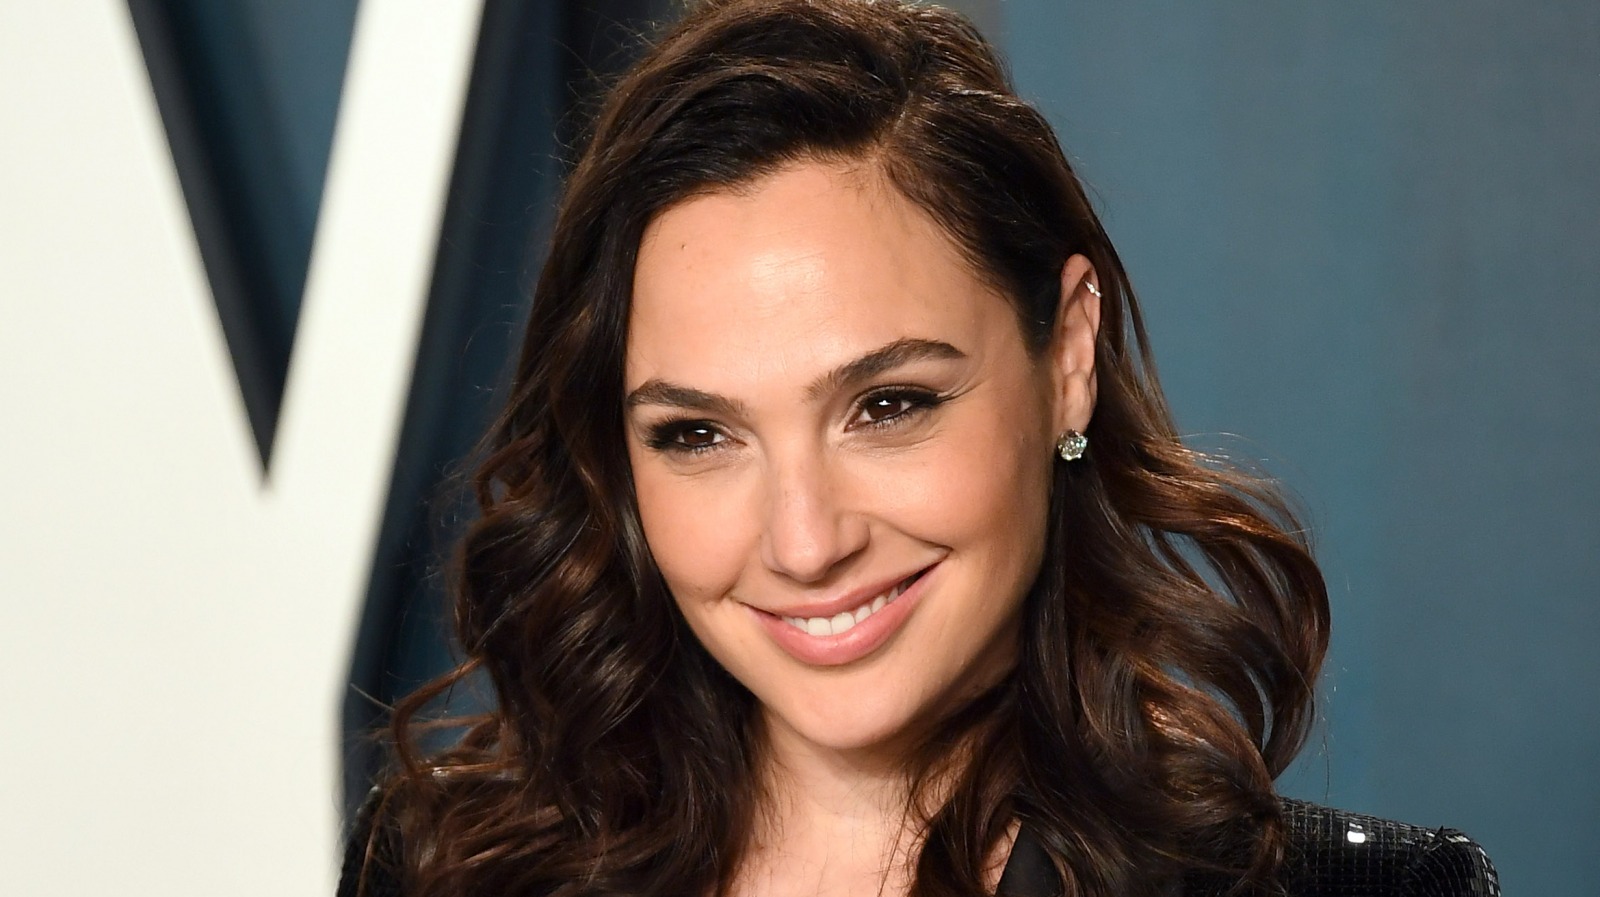 Gal Gadot Tattoos: Does the Wonder Woman Star Have Any Ink? - wide 3